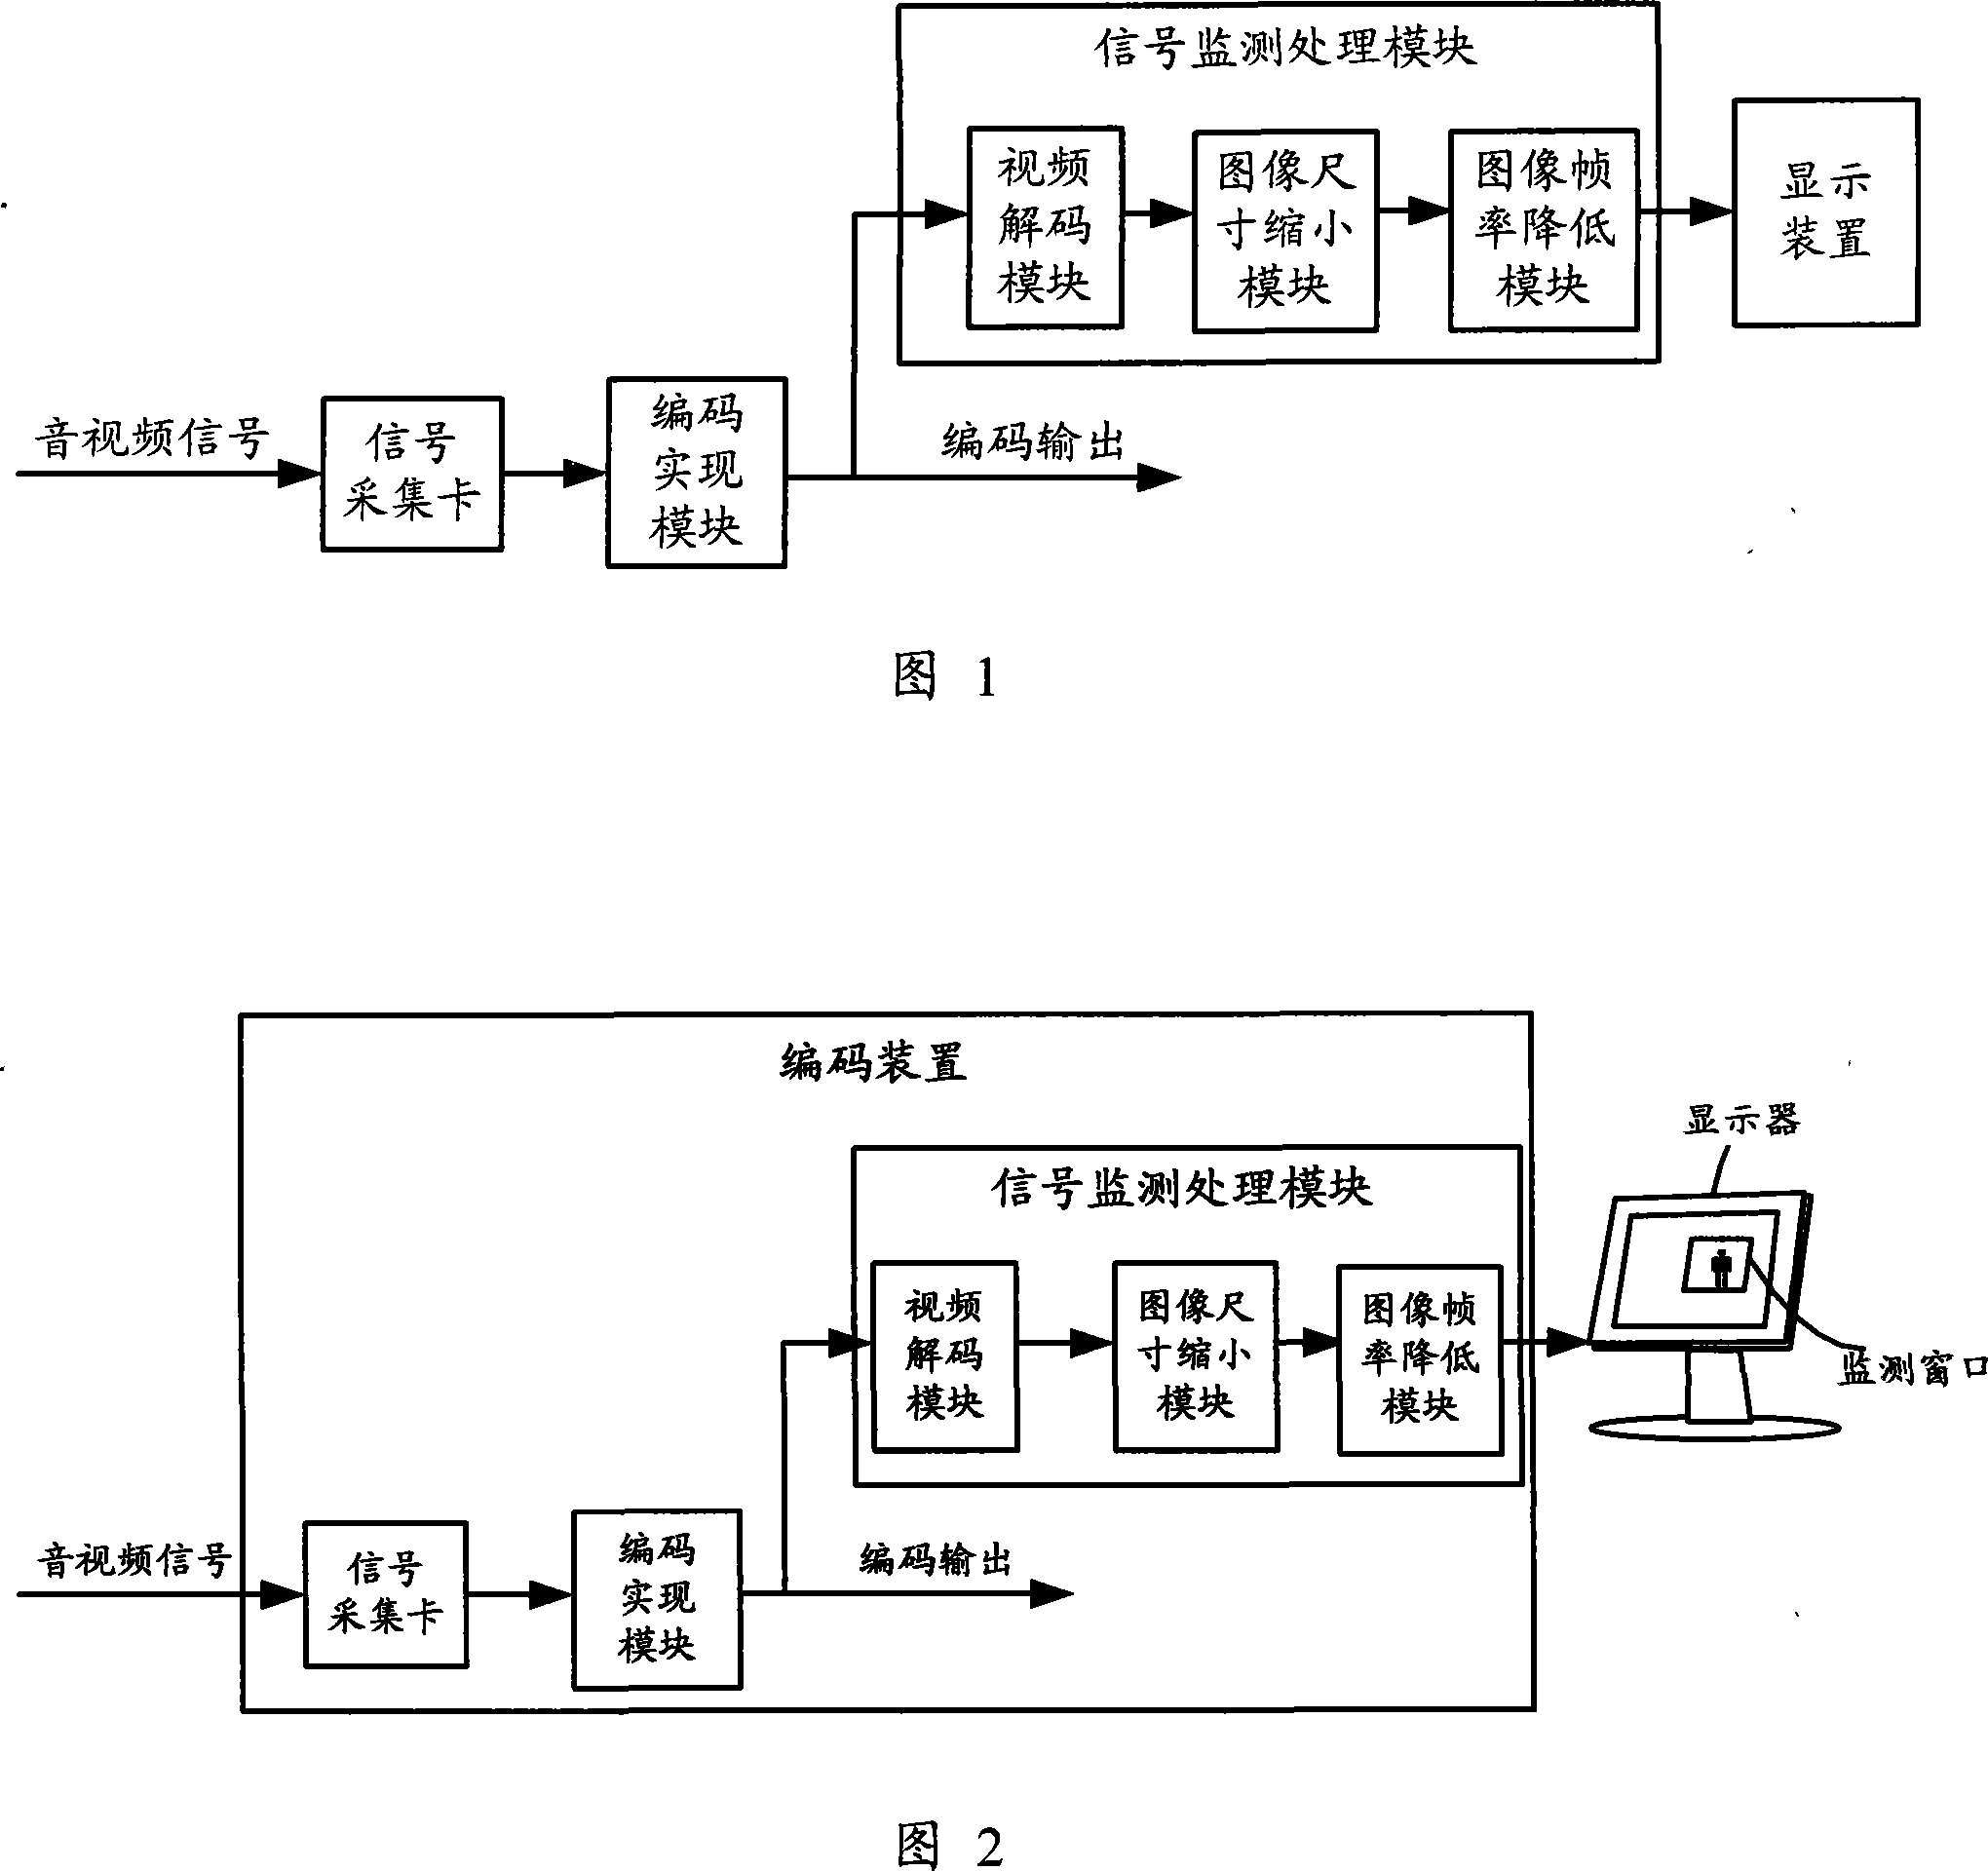 An encoding device with signal real time monitoring function